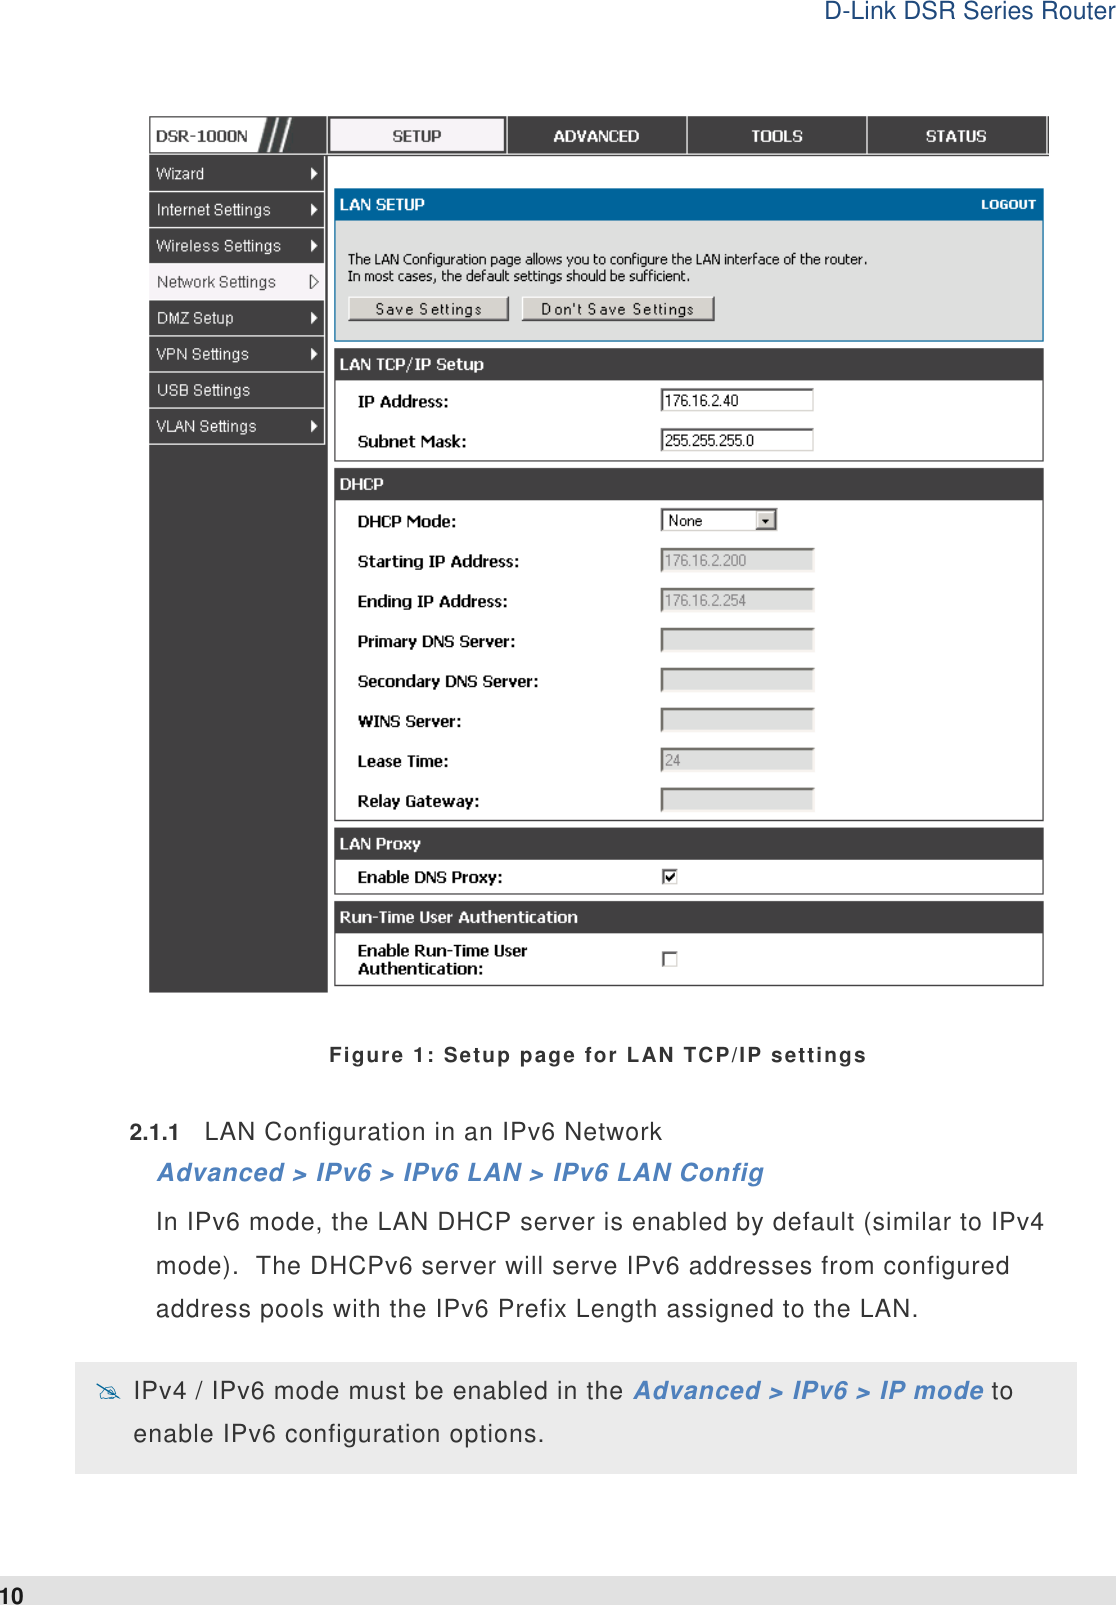 D-Link DSR Series Router 10  Figure 1: Setup page for LAN TCP/IP settings 2.1.1  LAN Configuration in an IPv6 Network Advanced &gt; IPv6 &gt; IPv6 LAN &gt; IPv6 LAN Config In IPv6 mode, the LAN DHCP server is enabled by default (similar to IPv4 mode).  The DHCPv6 server will serve IPv6 addresses from configured address pools with the IPv6 Prefix Length assigned to the LAN.    IPv4 / IPv6 mode must be enabled in the Advanced &gt; IPv6 &gt; IP mode to enable IPv6 configuration options.  